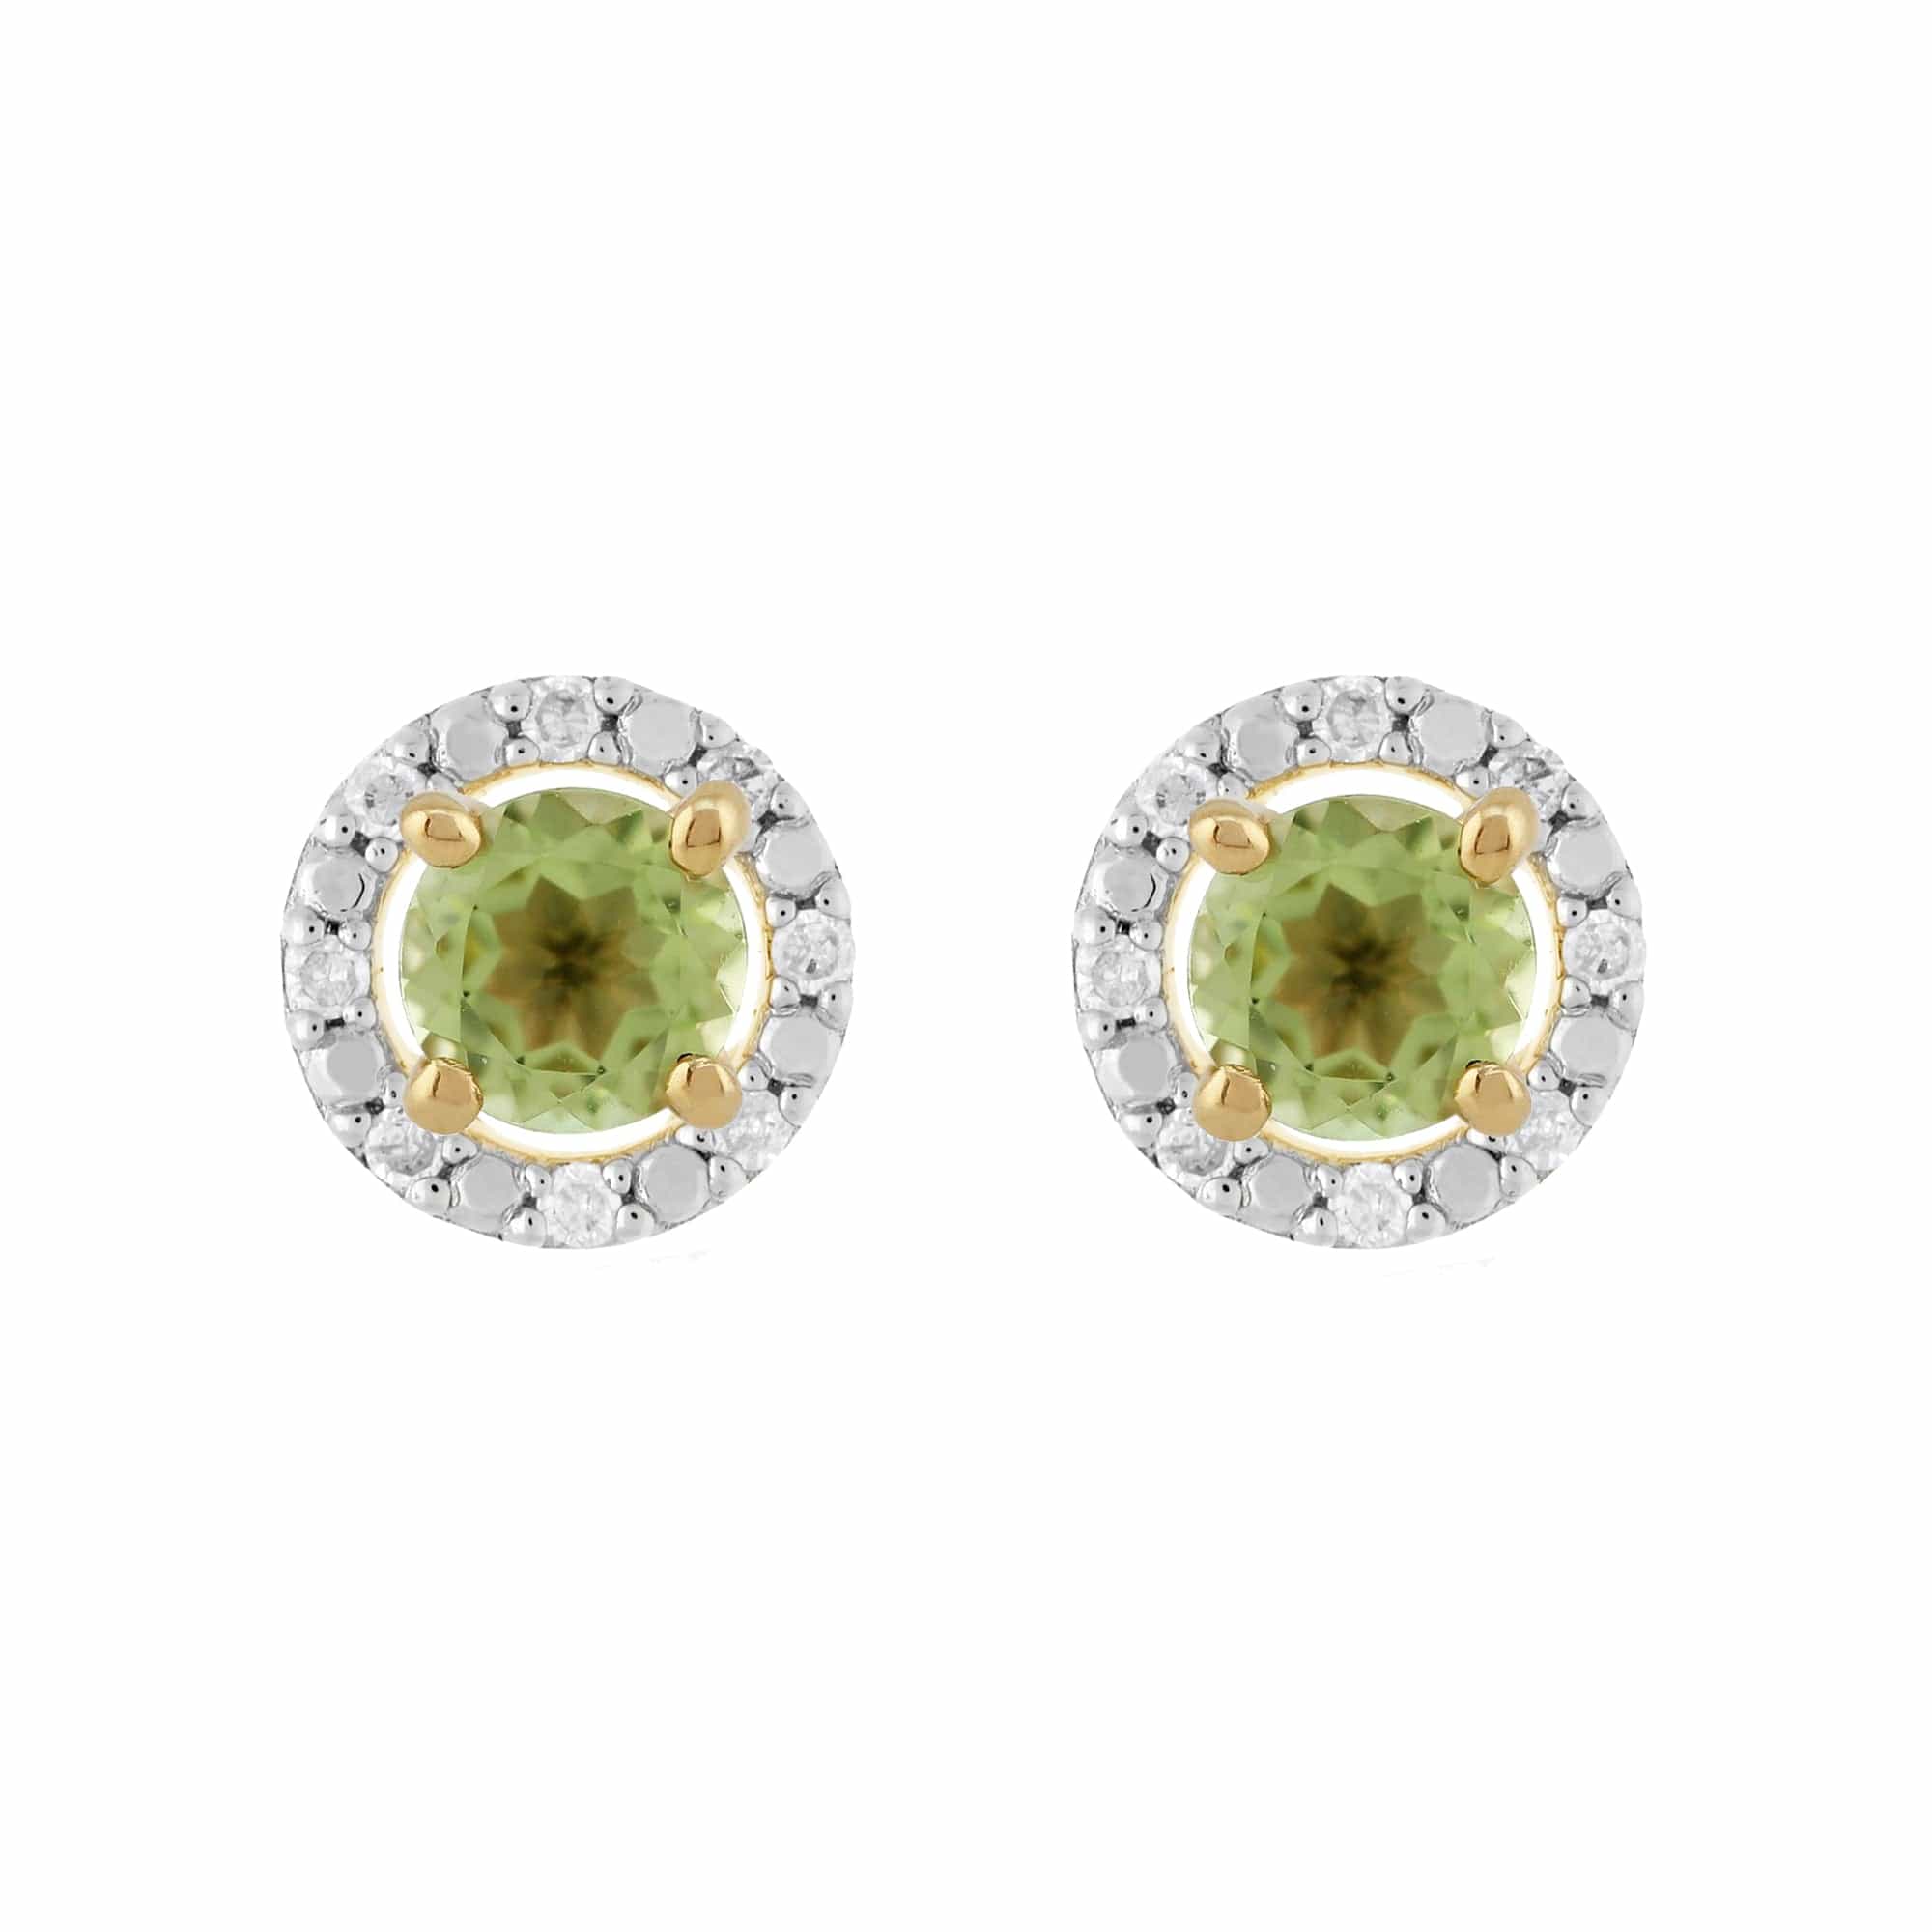 11562-191E0376019 Classic Round Peridot Stud Earrings with Detachable Diamond Round Earrings Jacket Set in 9ct Yellow Gold 1